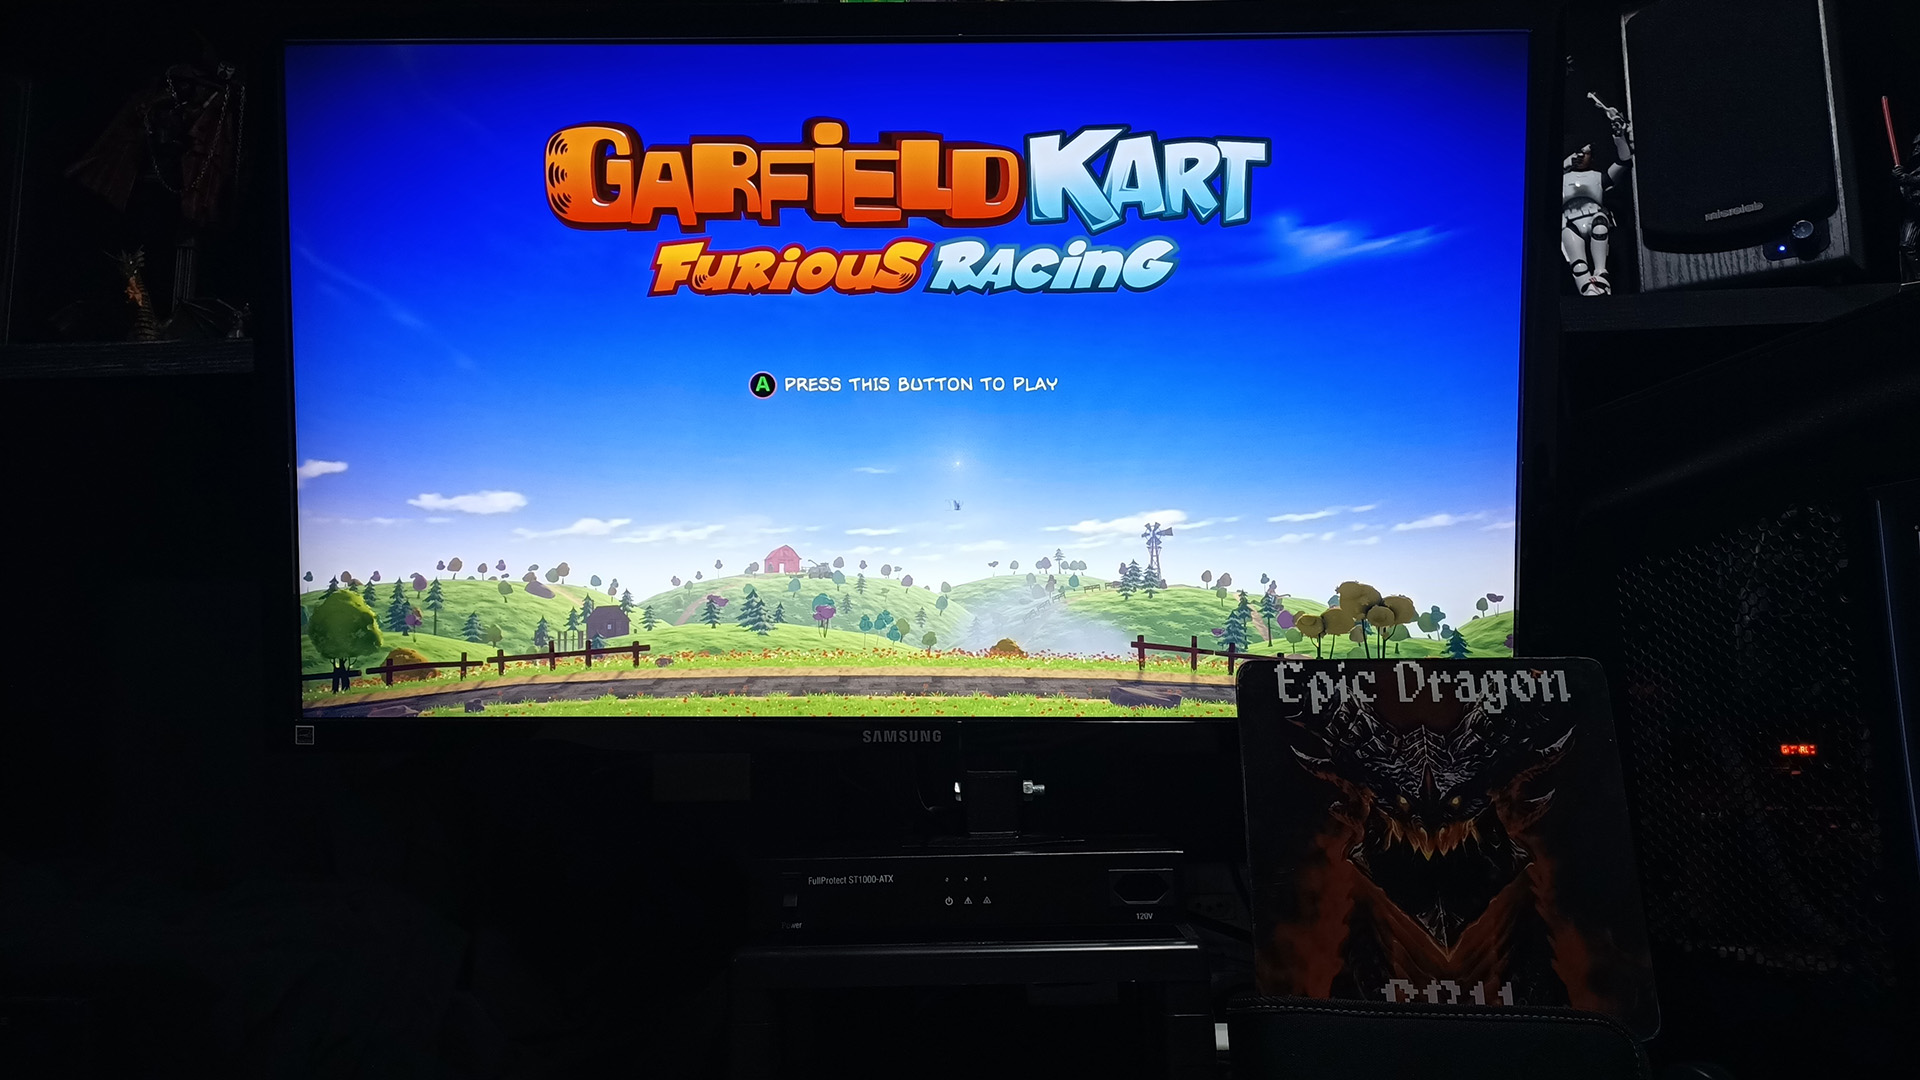 EpicDragon: Garfield Kart Furious Racing: Valley Of The Kings [Time Trial: Lap Time] (PC) 0:00:53.019 points on 2022-08-14 15:04:23